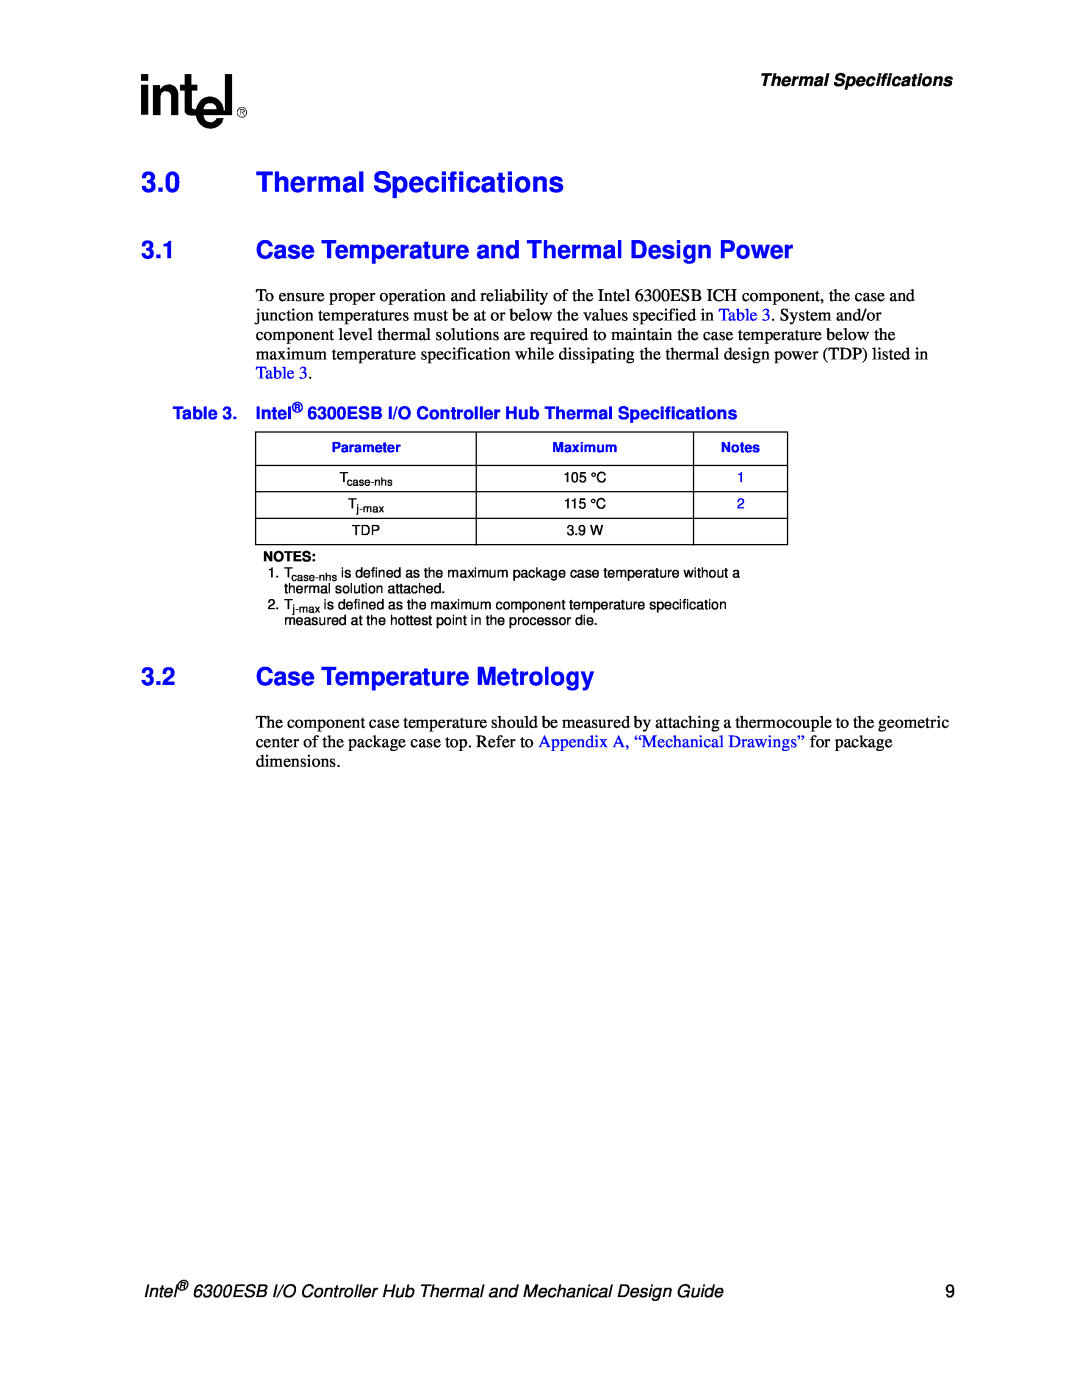 Intel 6300ESB manual 3.0Thermal Specifications, 3.1Case Temperature and Thermal Design Power, 3.2Case Temperature Metrology 